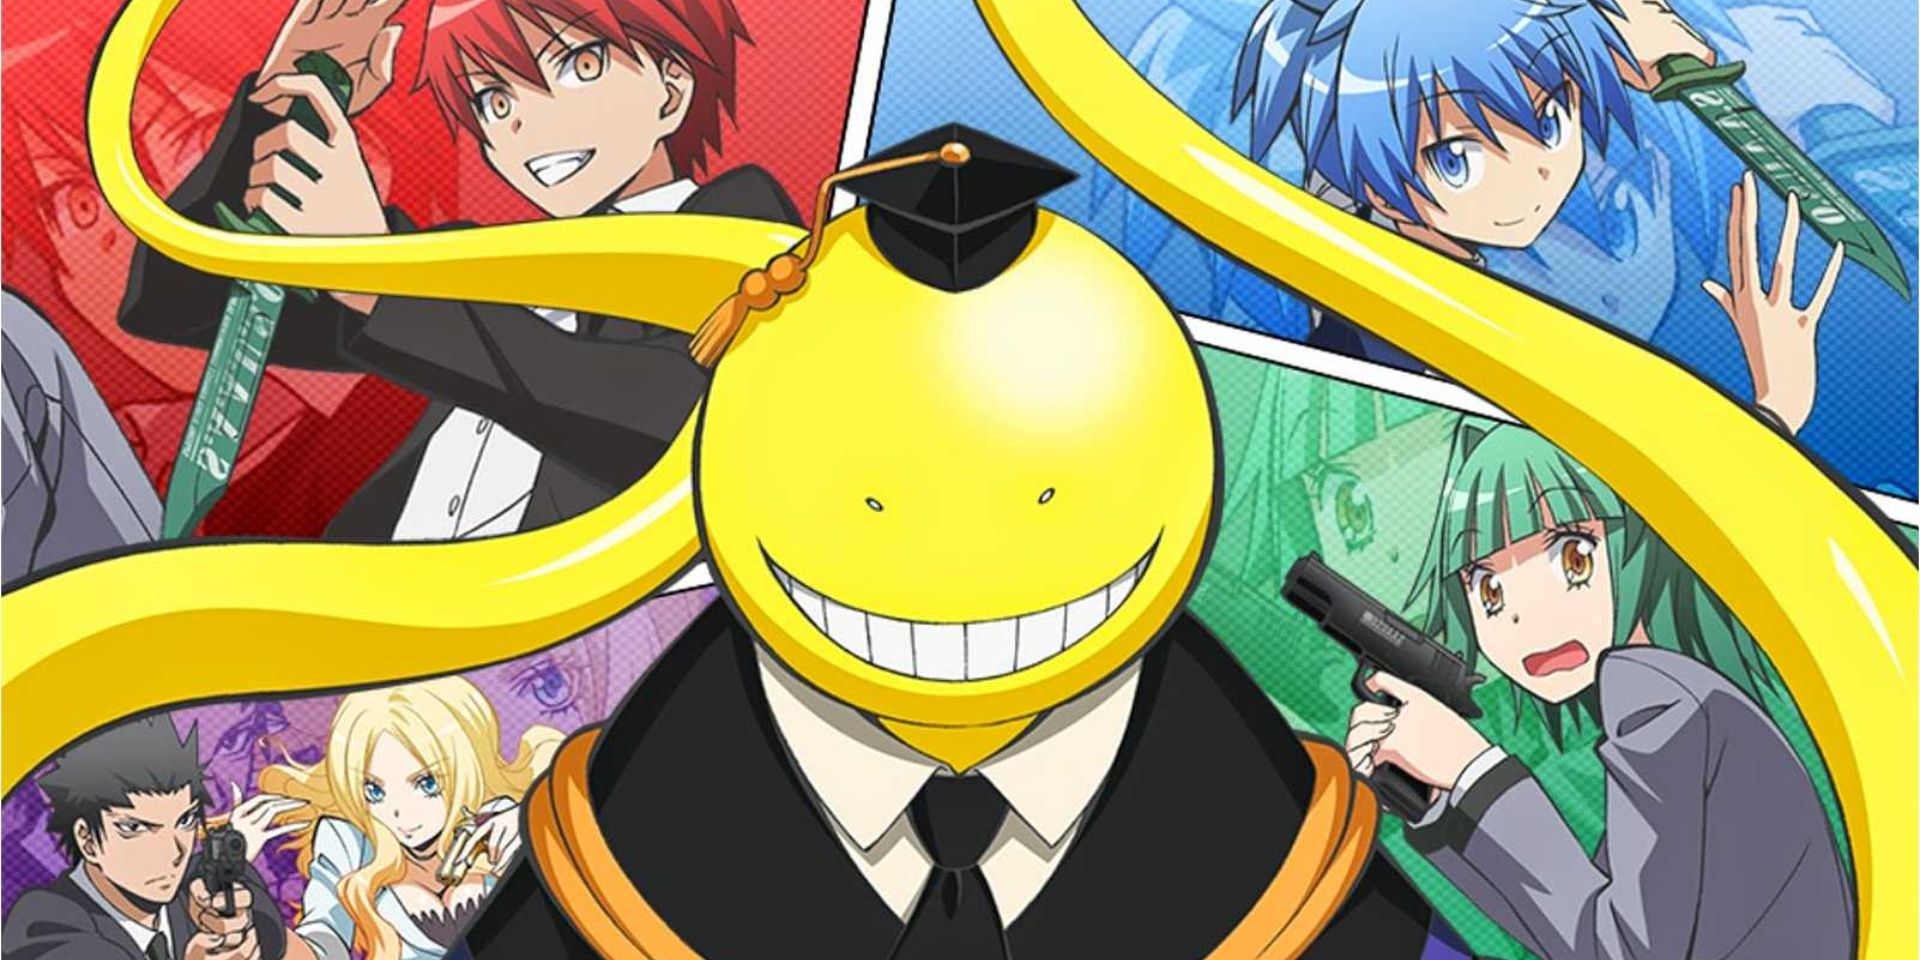 Assassination Classroom: The Psychology Behind the Main Characters